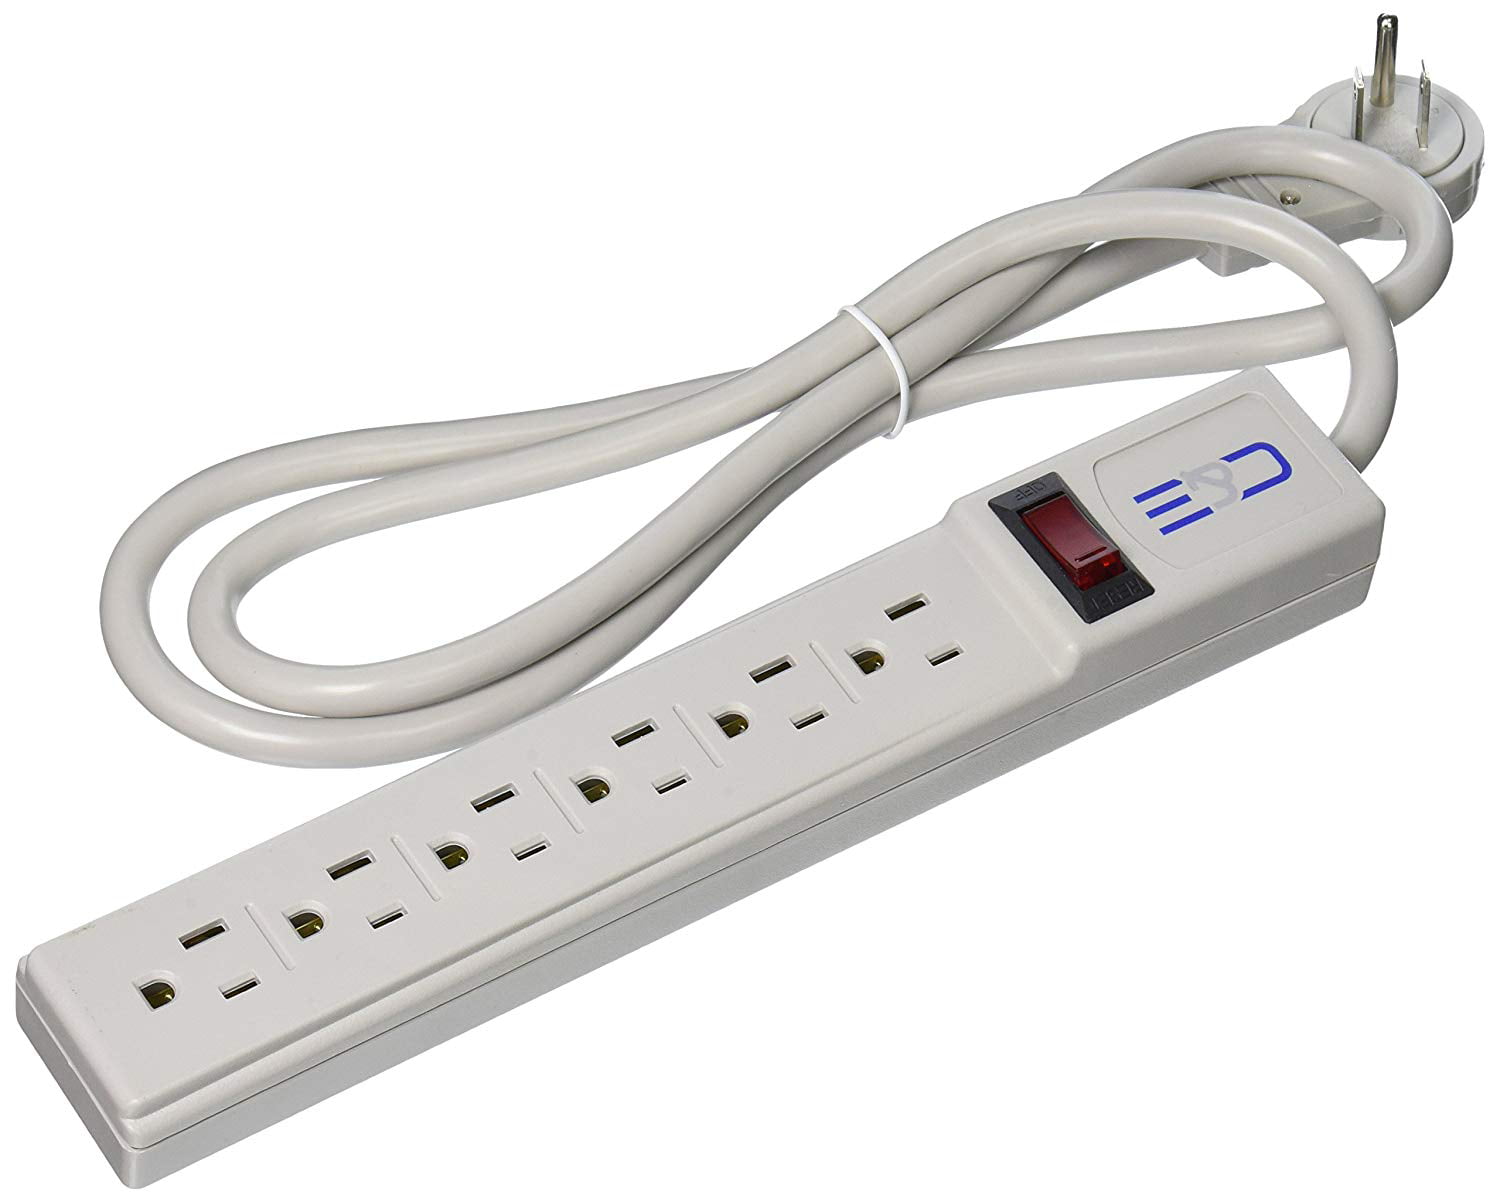 Fosmon 2x 4 Outlet Surge Protector Power Strip Grounded Flat Plug Extension Cord 